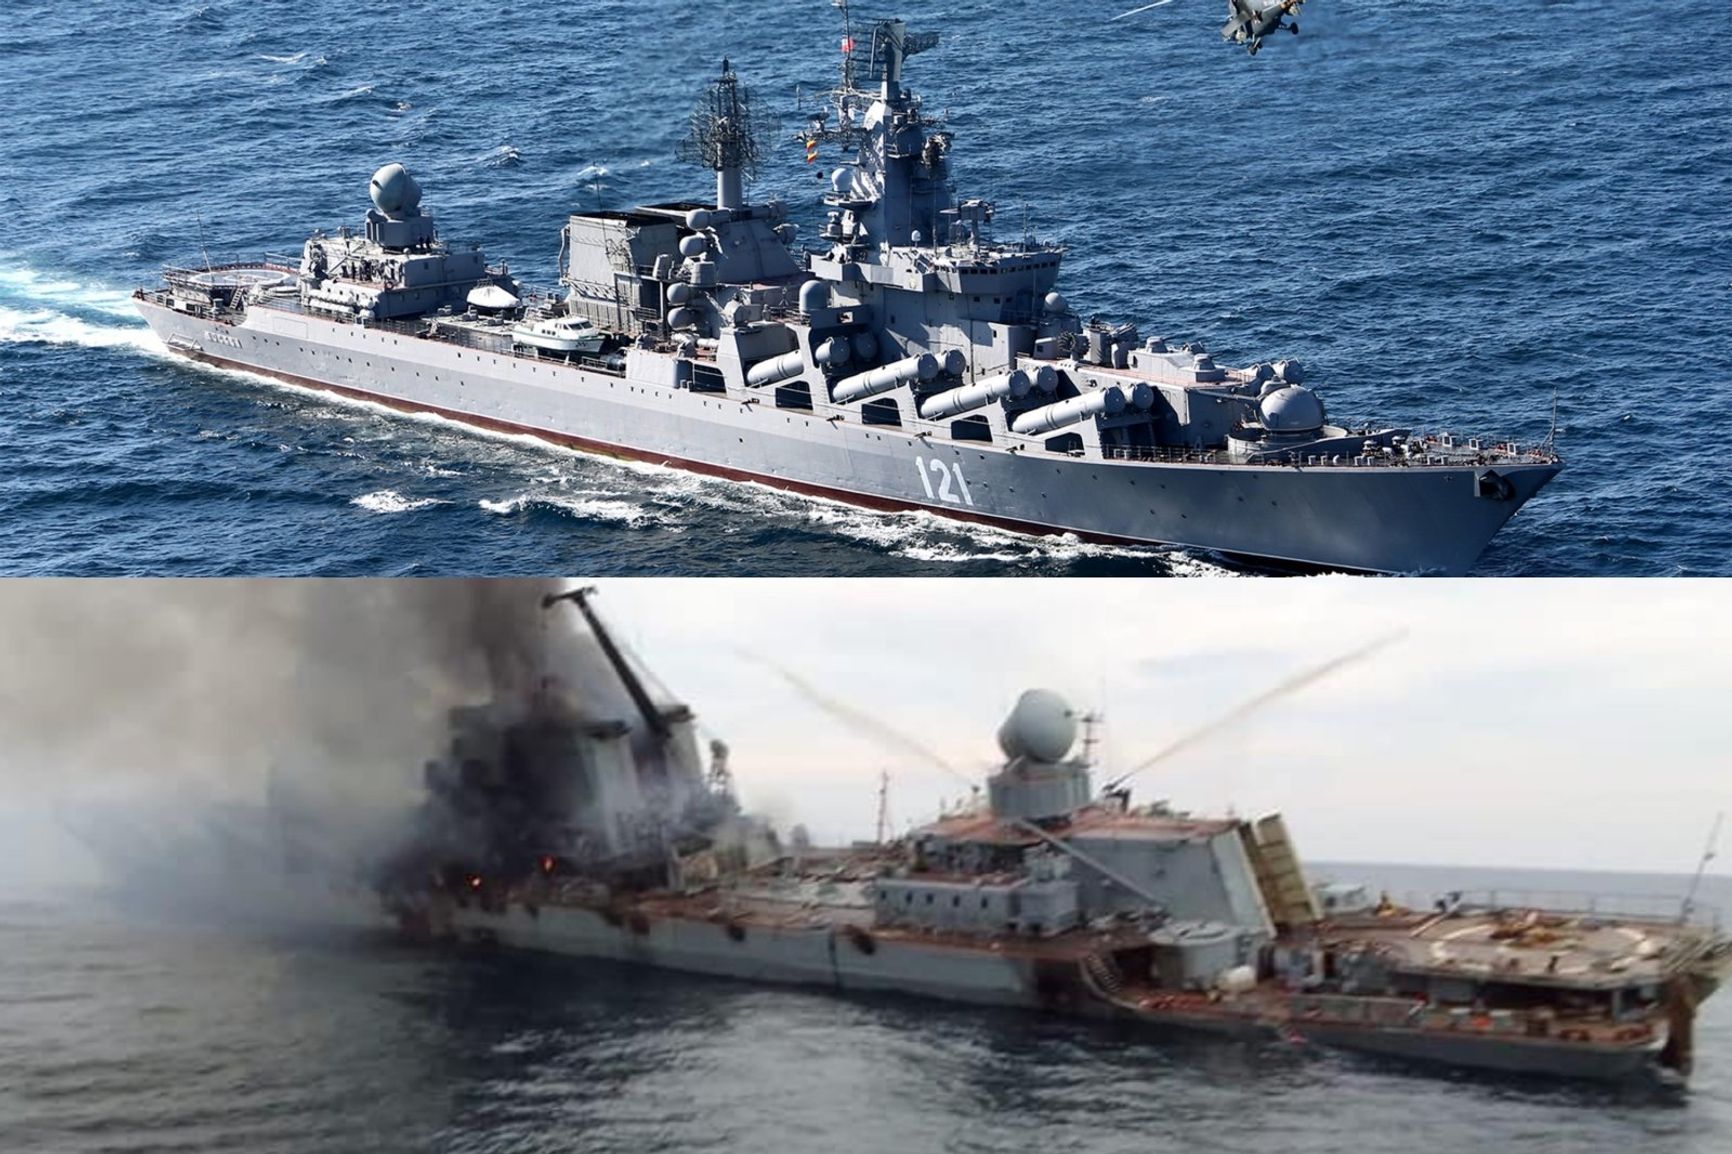 The Moskva cruiser before and after the attack